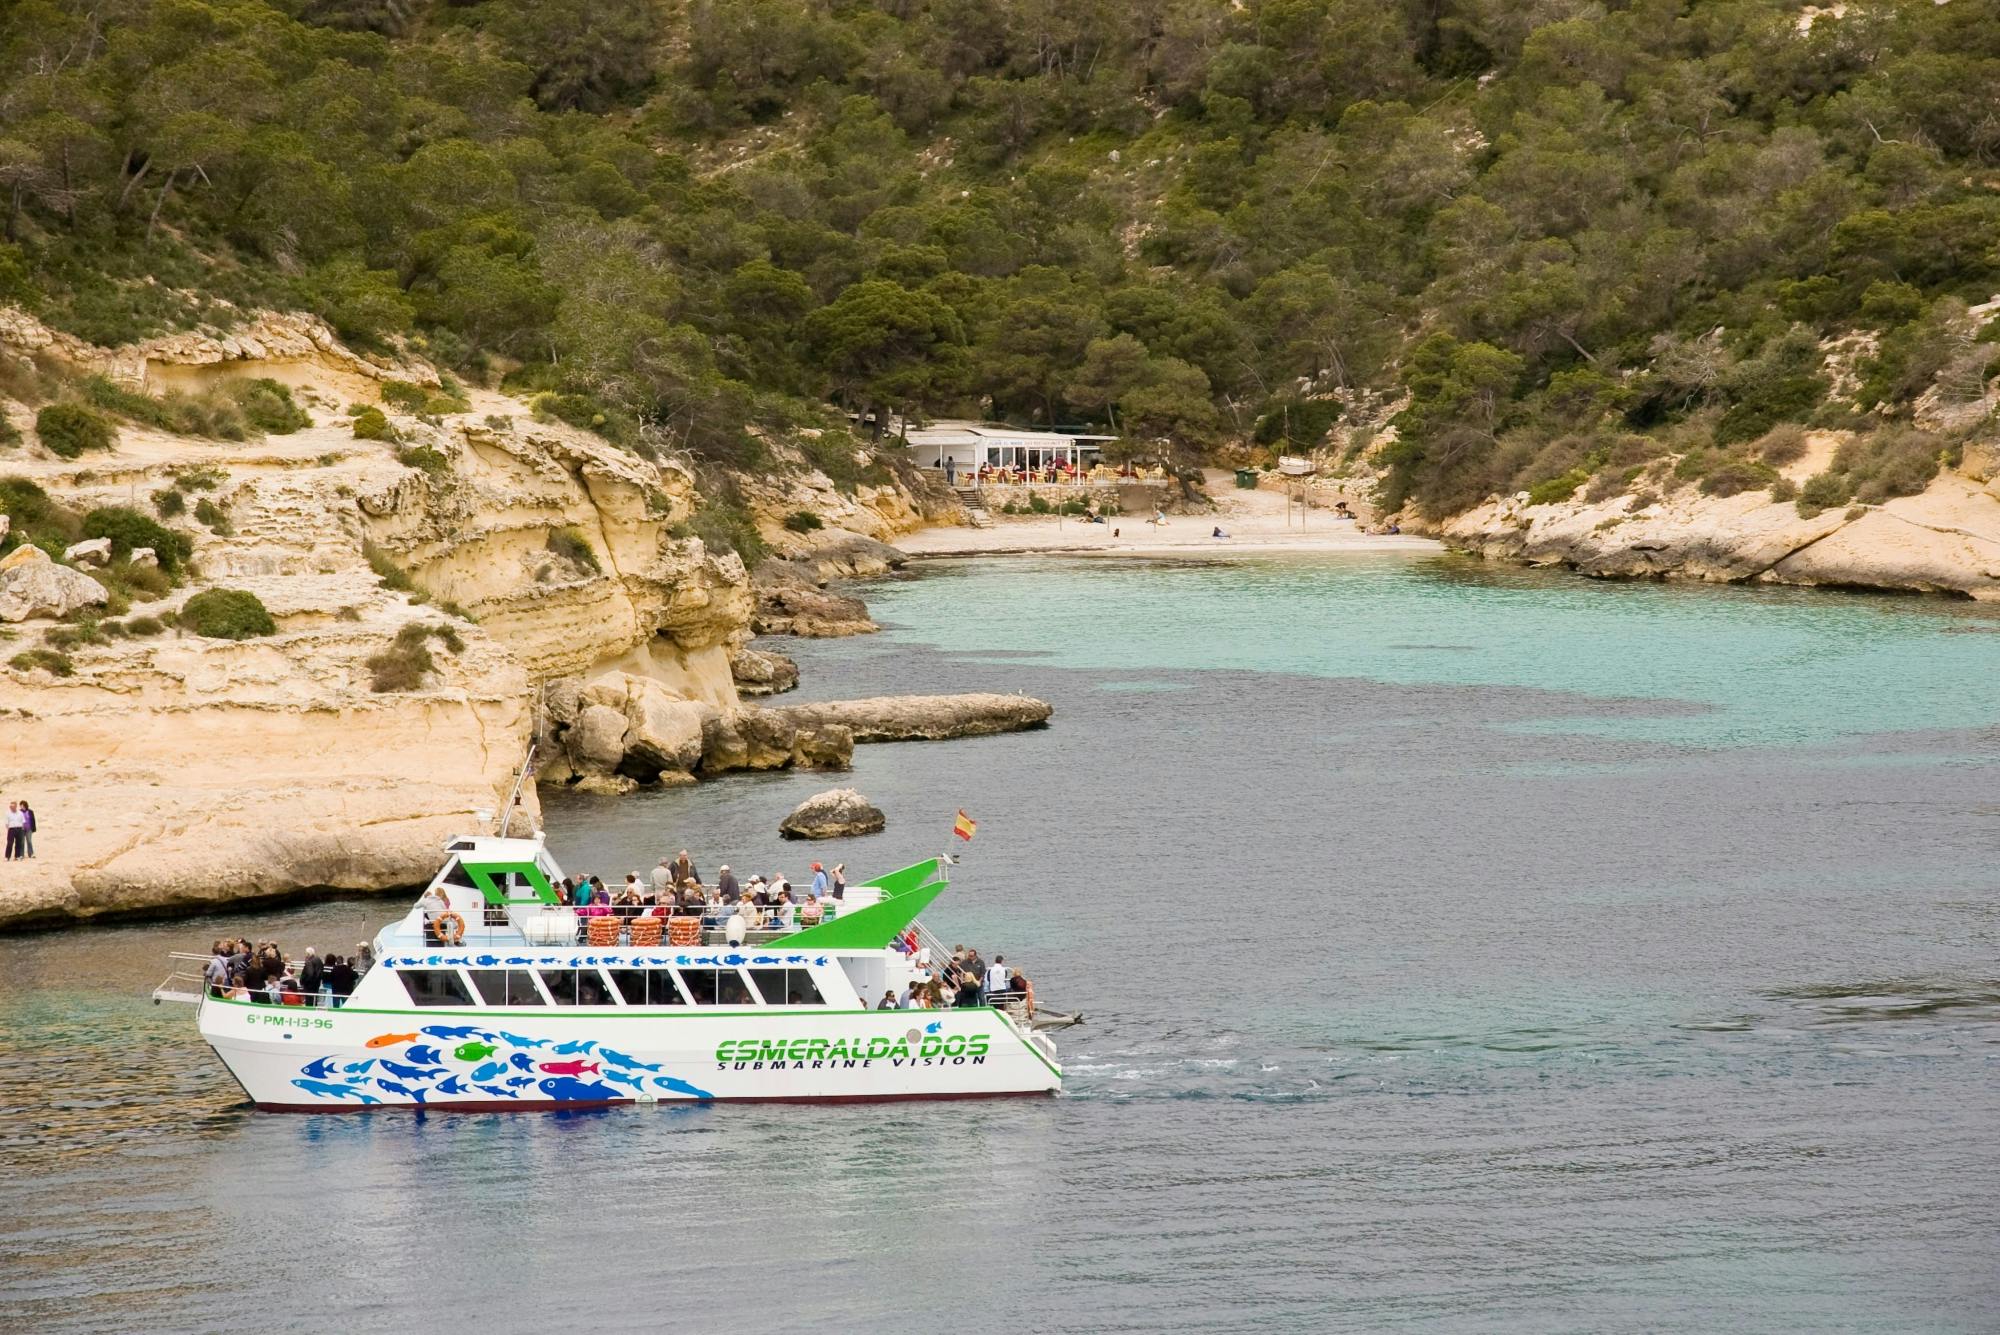 Two-hour Dolphin Spotting Catamaran Cruise Ticket with Cruceros Costa Calvia